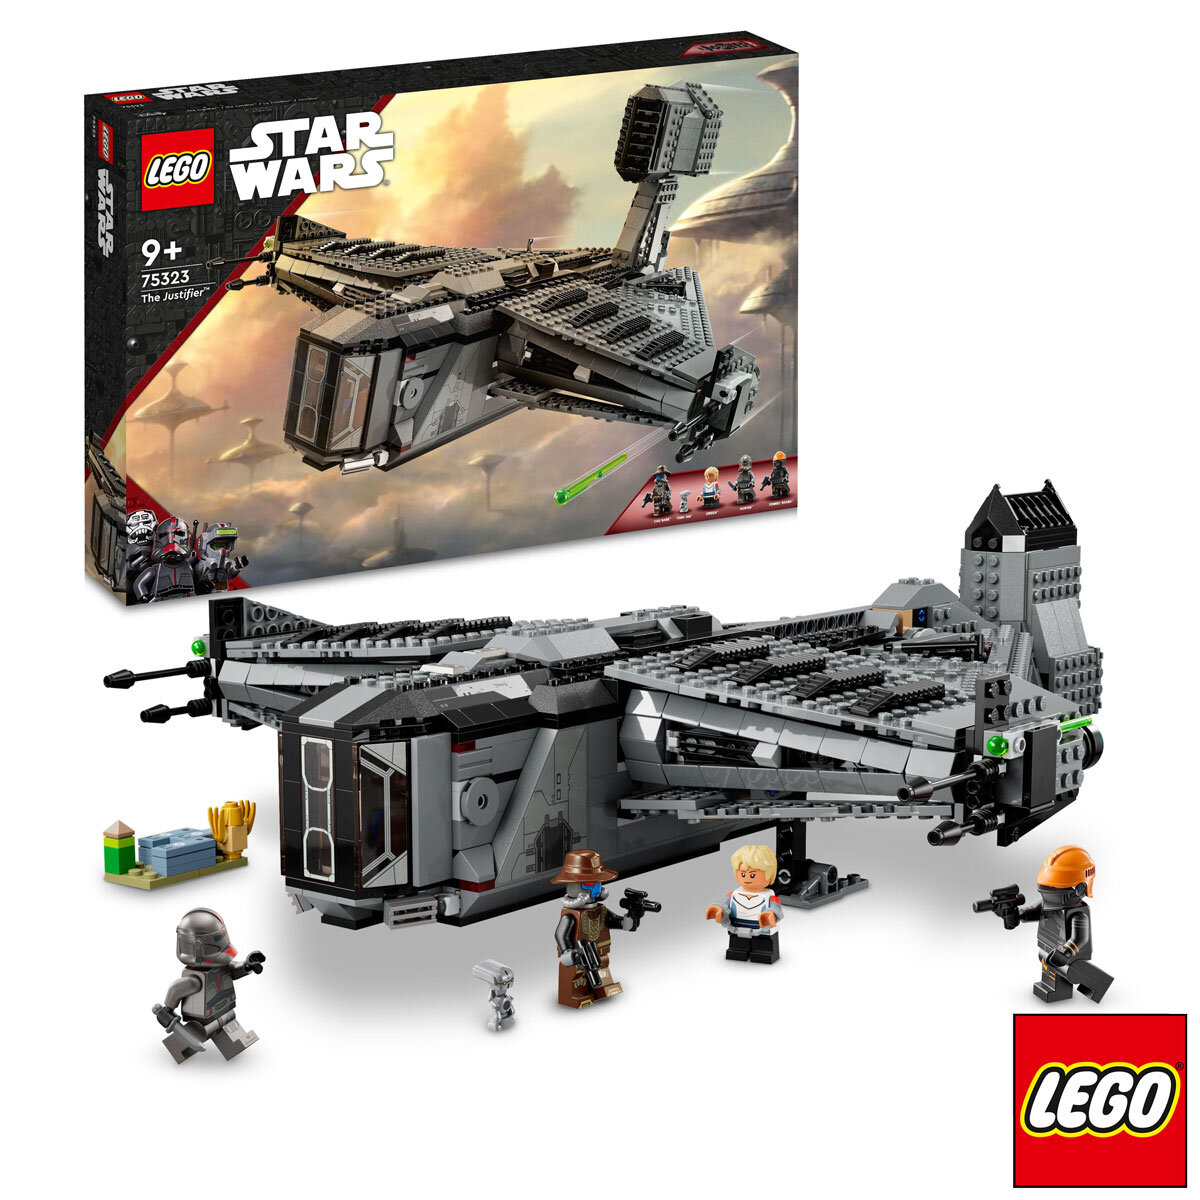 Buy Star Wars The Justifier Item & Box Image at Costco.co.uk